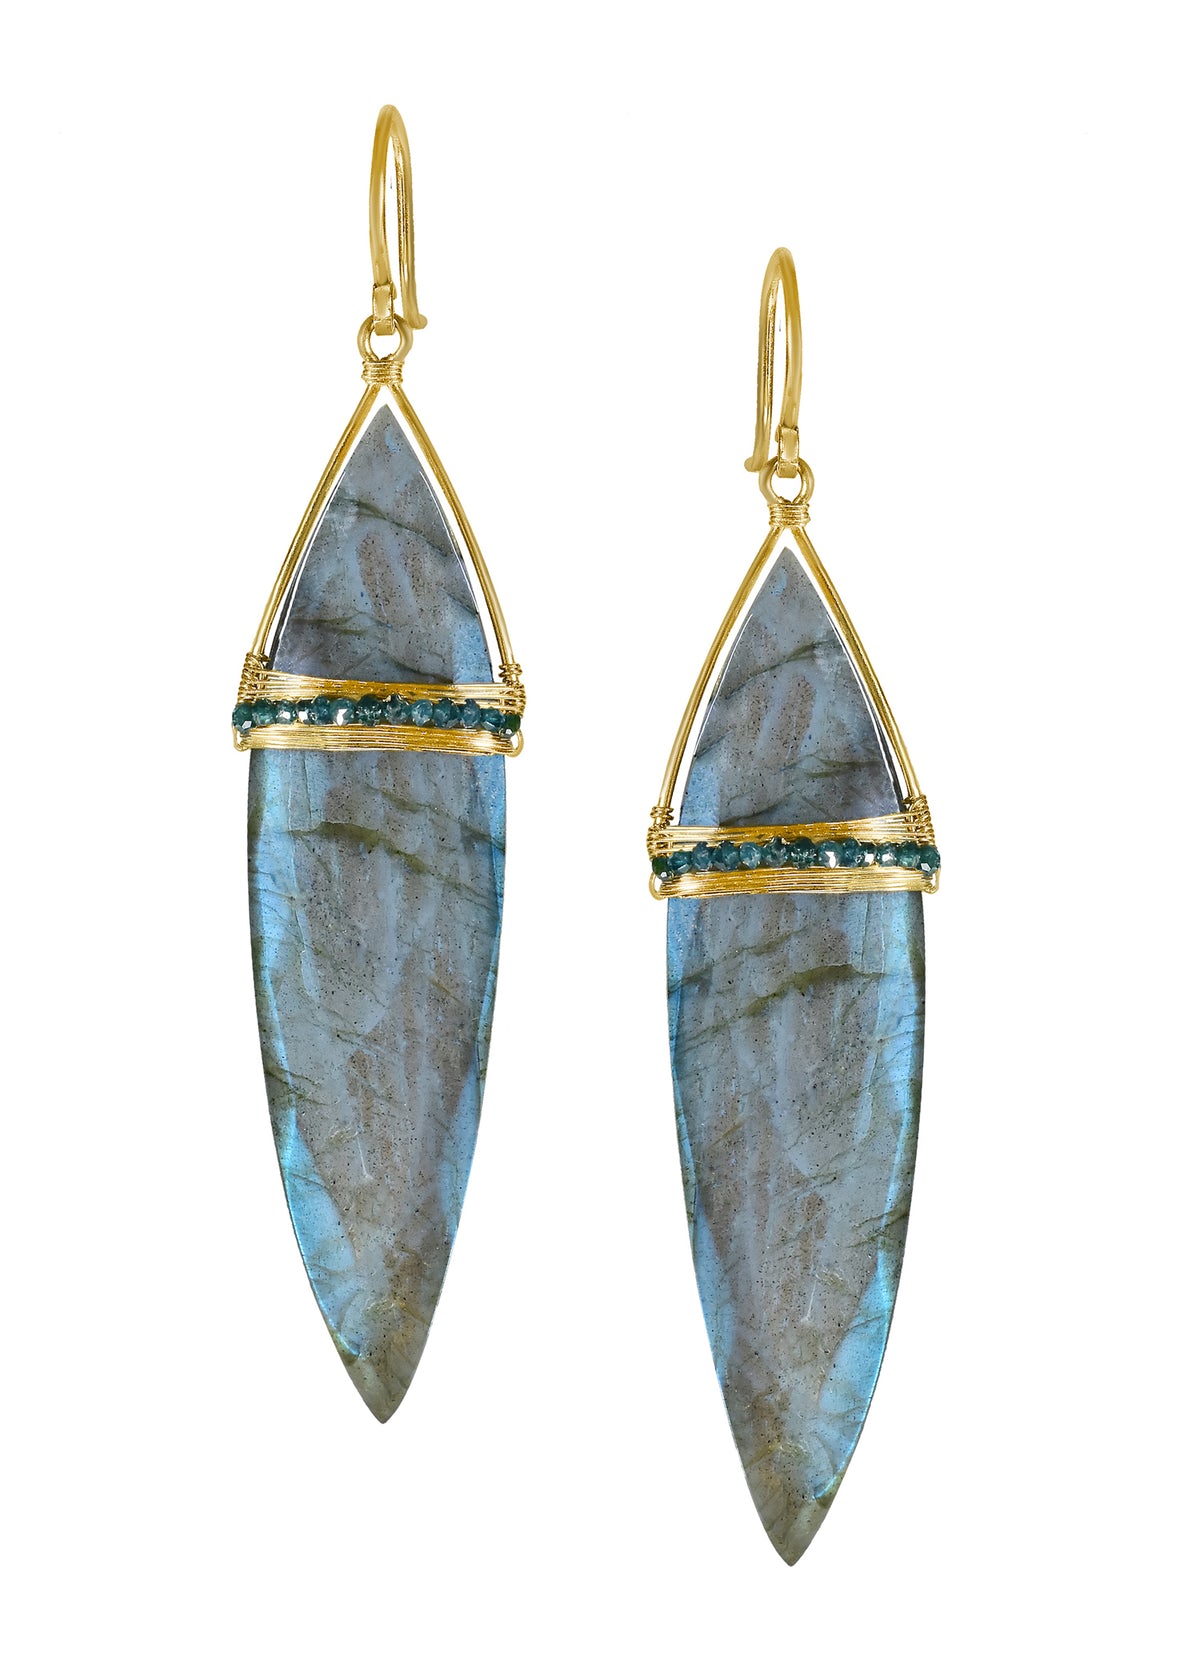 Labradorite 14k gold Earrings measure 2-5/8&quot; in length (including the ear wires) and 5/8&quot; in width at the widest point Handmade in our Los Angeles studio